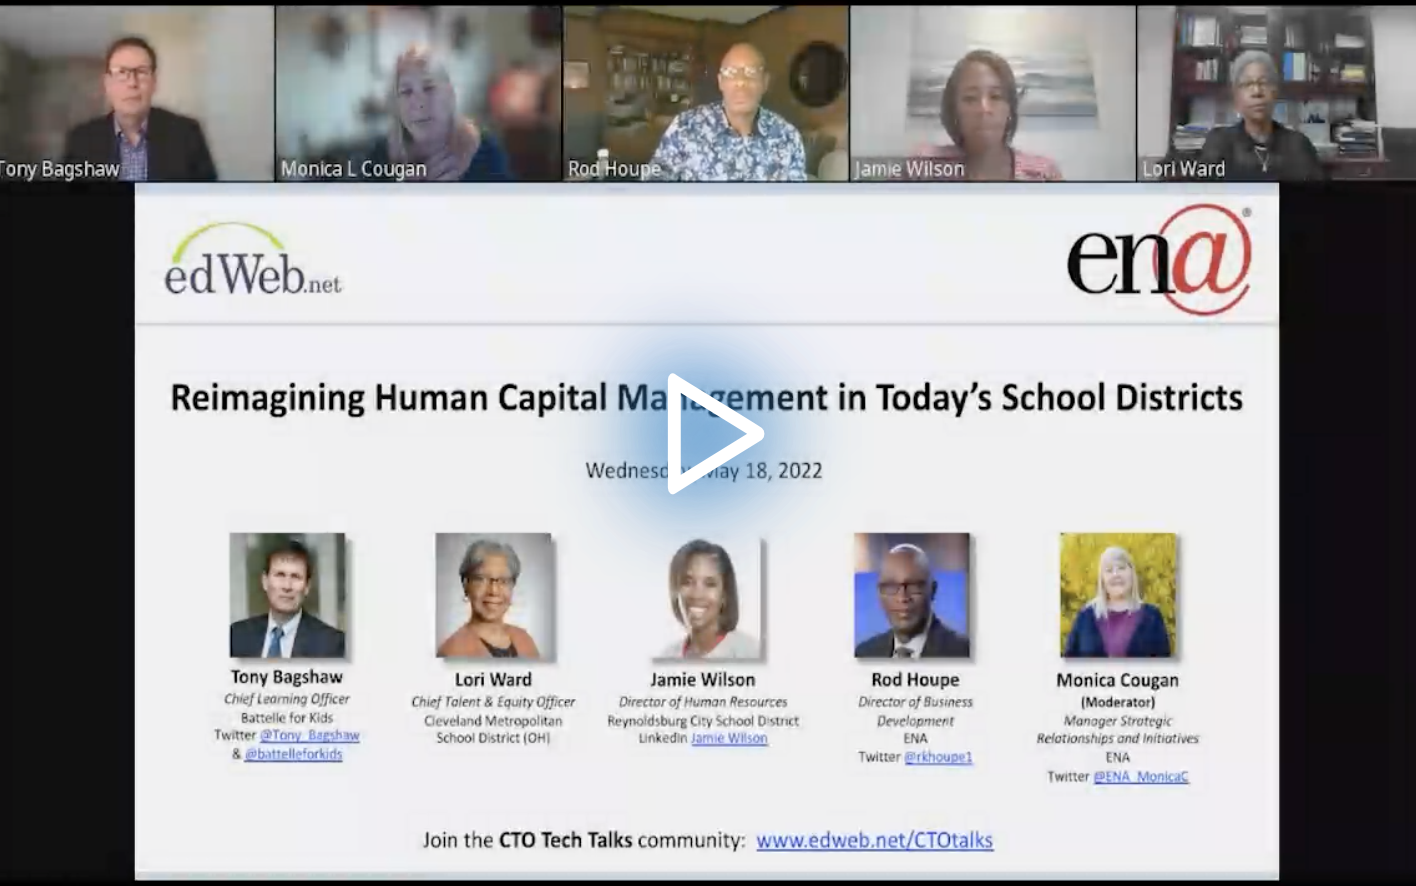 Reimagining Human Capital Management in Today’s School Districts edLeader Panel recording screenshot